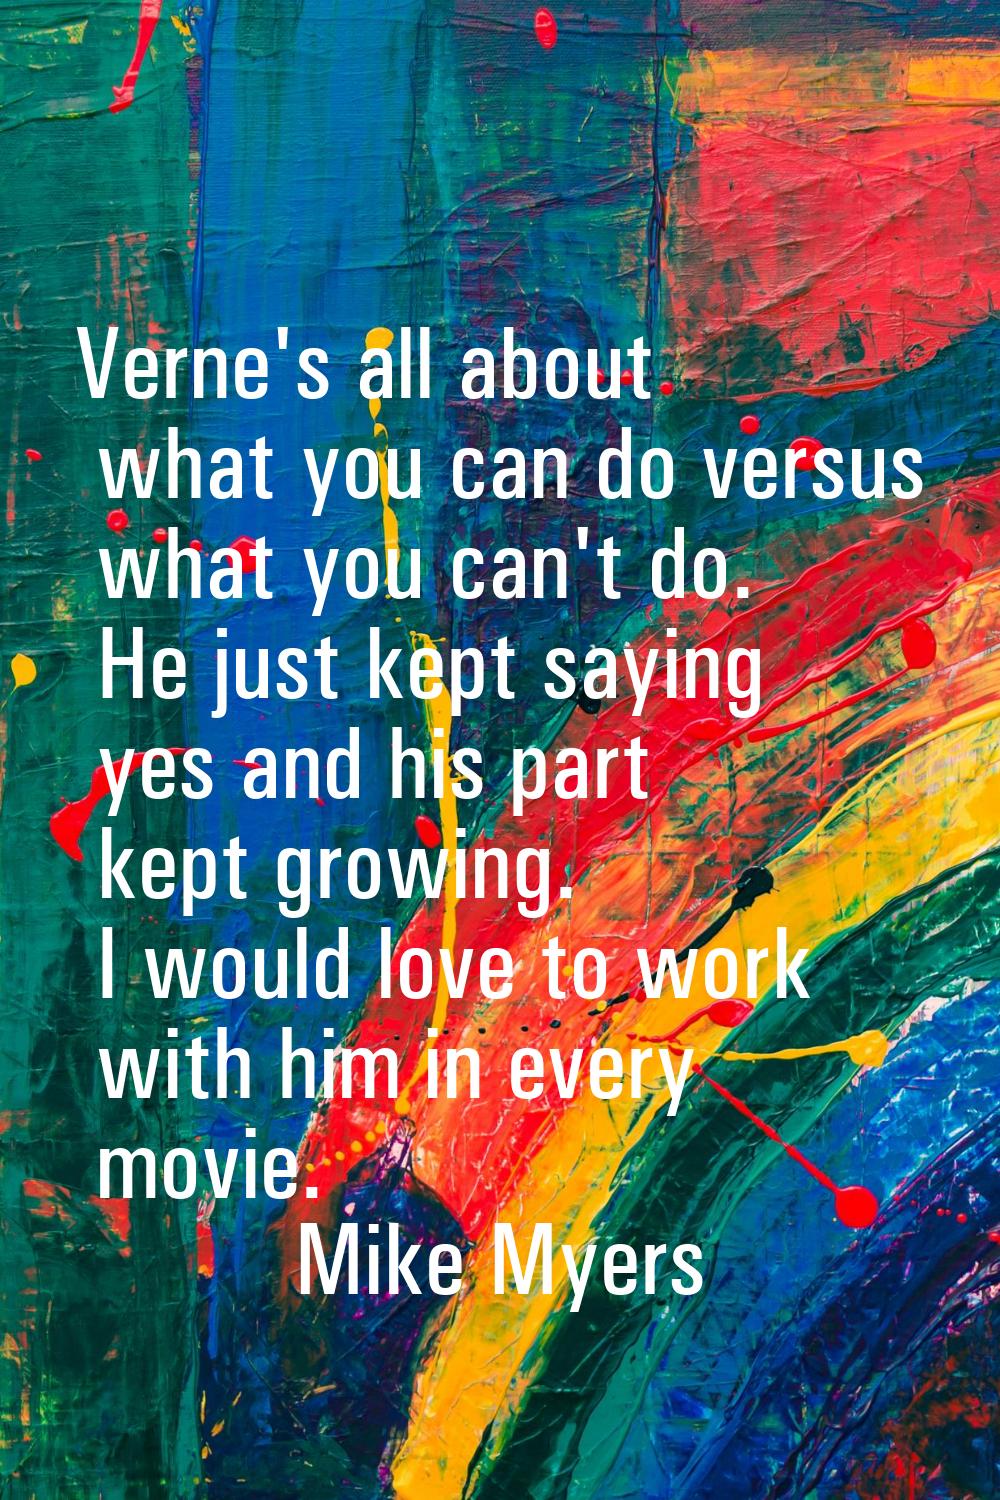 Verne's all about what you can do versus what you can't do. He just kept saying yes and his part ke